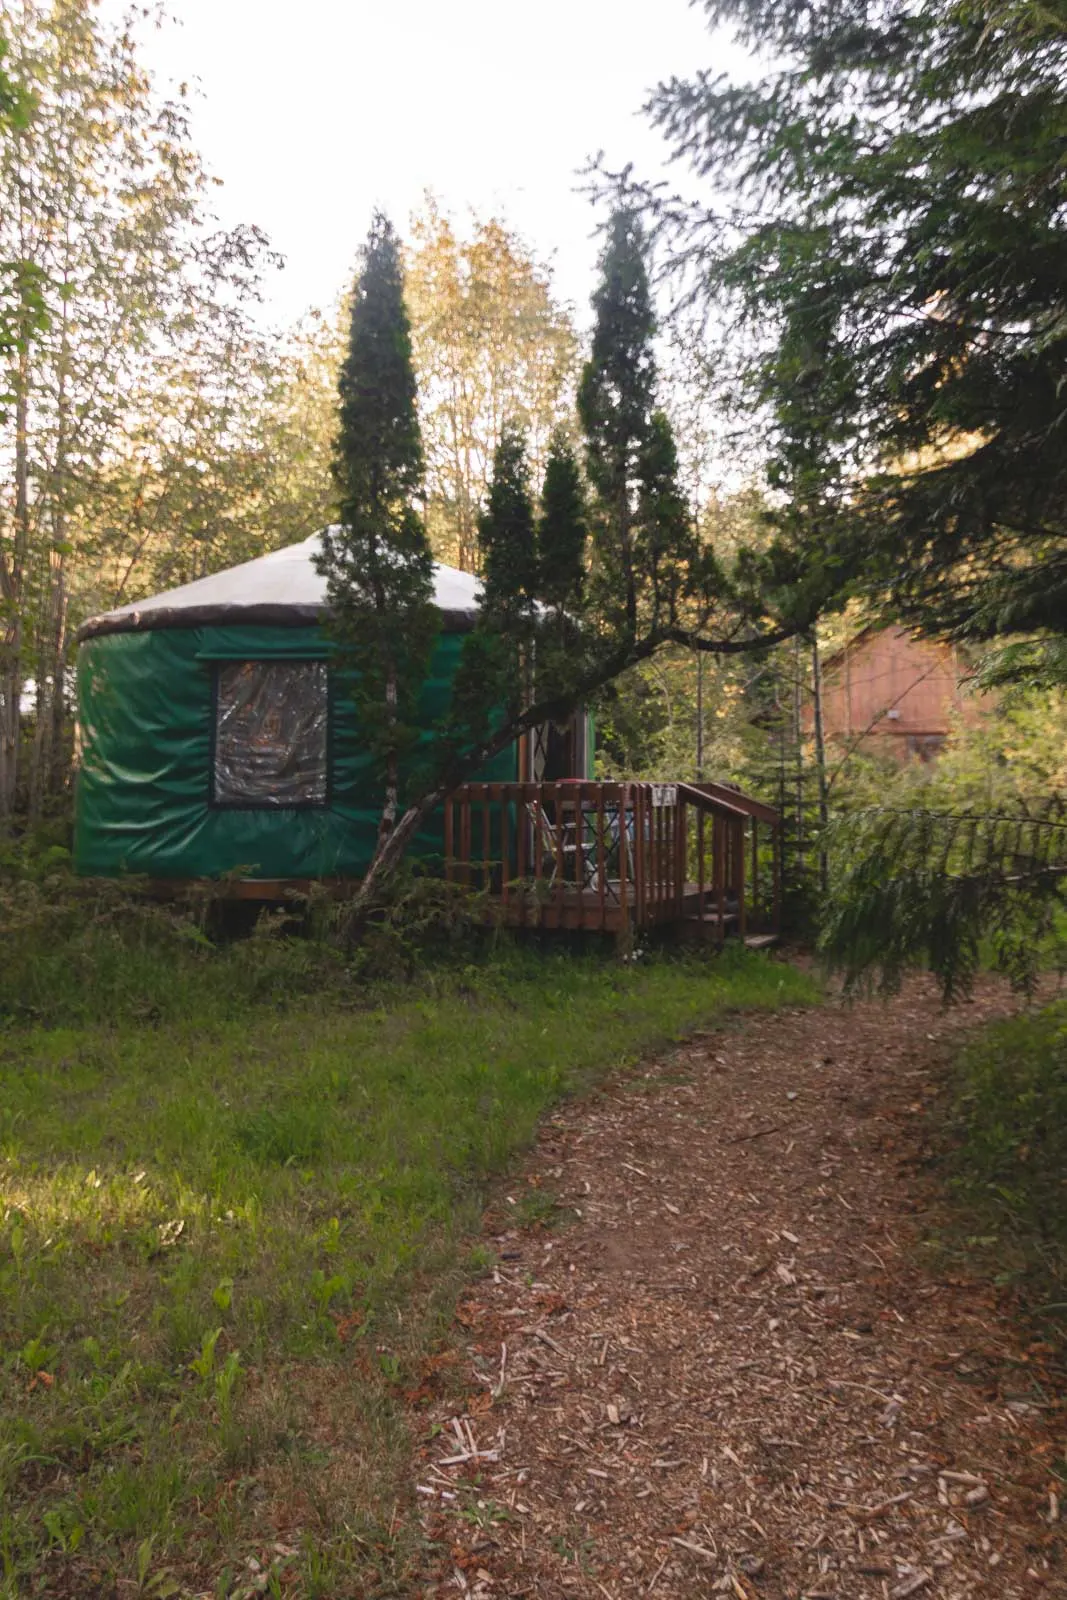 You can even stay at a yurt in some Oregon coast campgrounds!